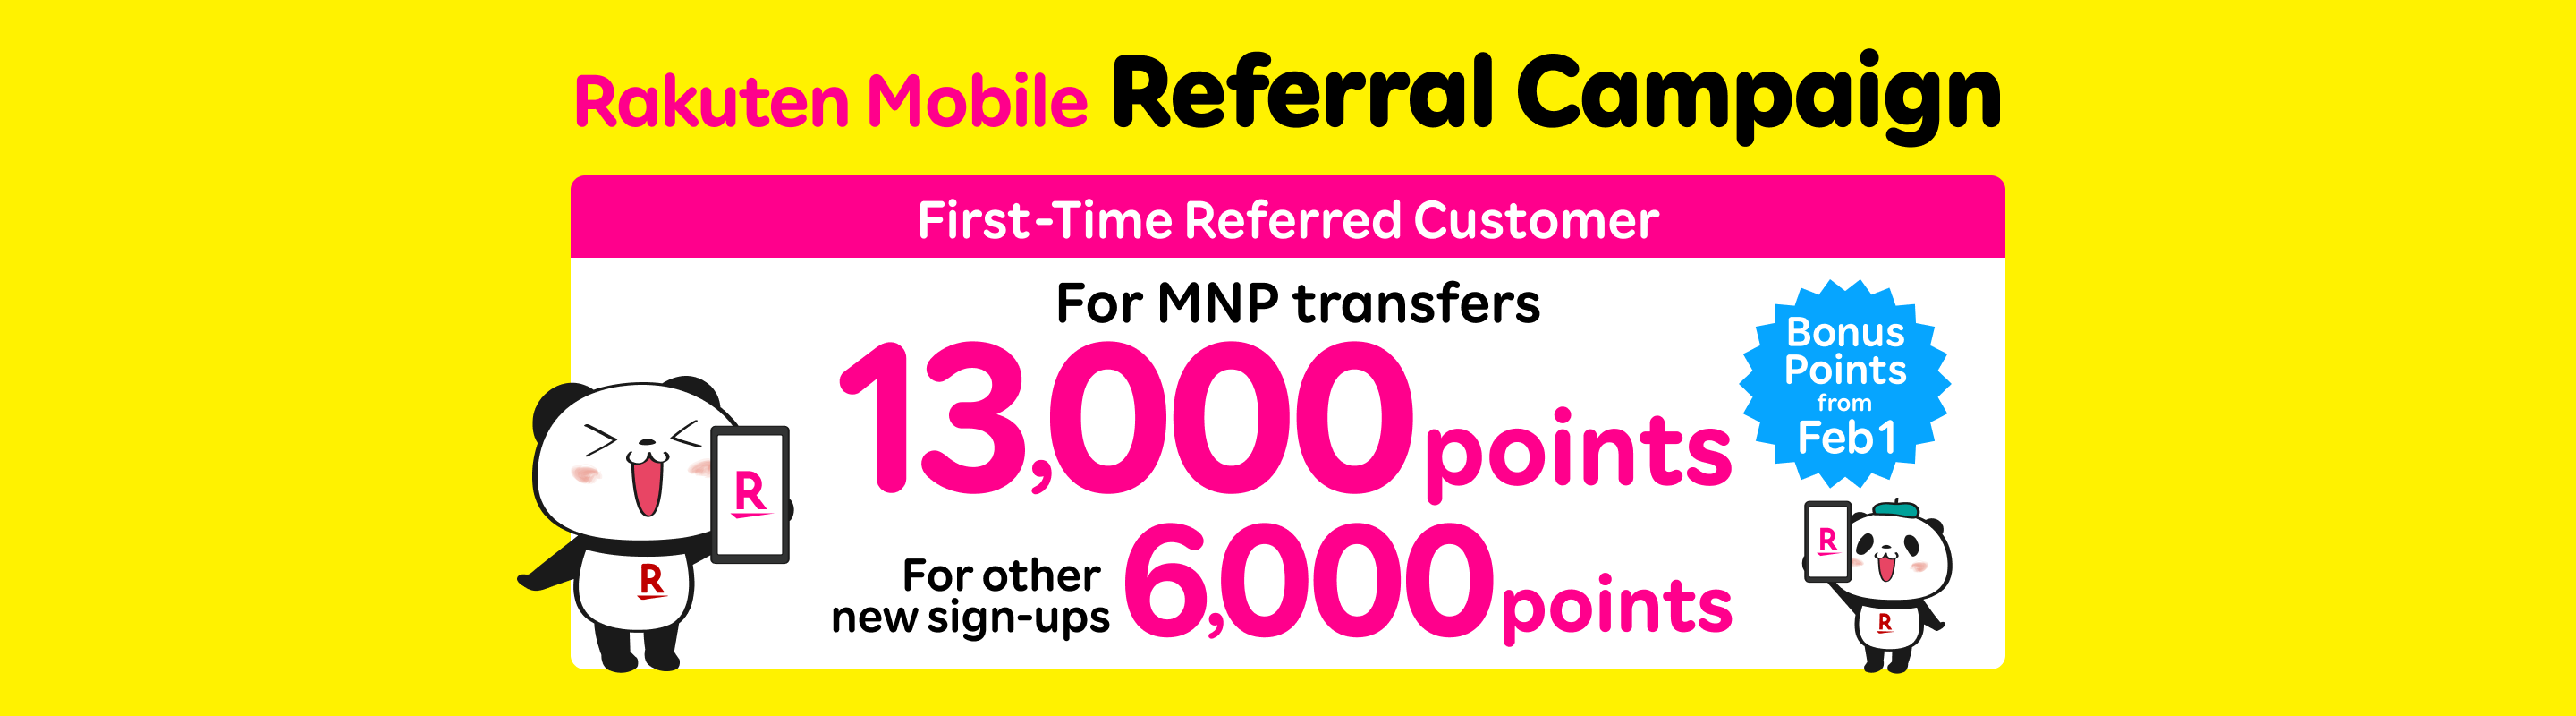 Apply for Rakuten Mobile via an existing subscriber's referral and receive 13,000 points for MNP transfers, or 6,000 points for other new sign-ups.